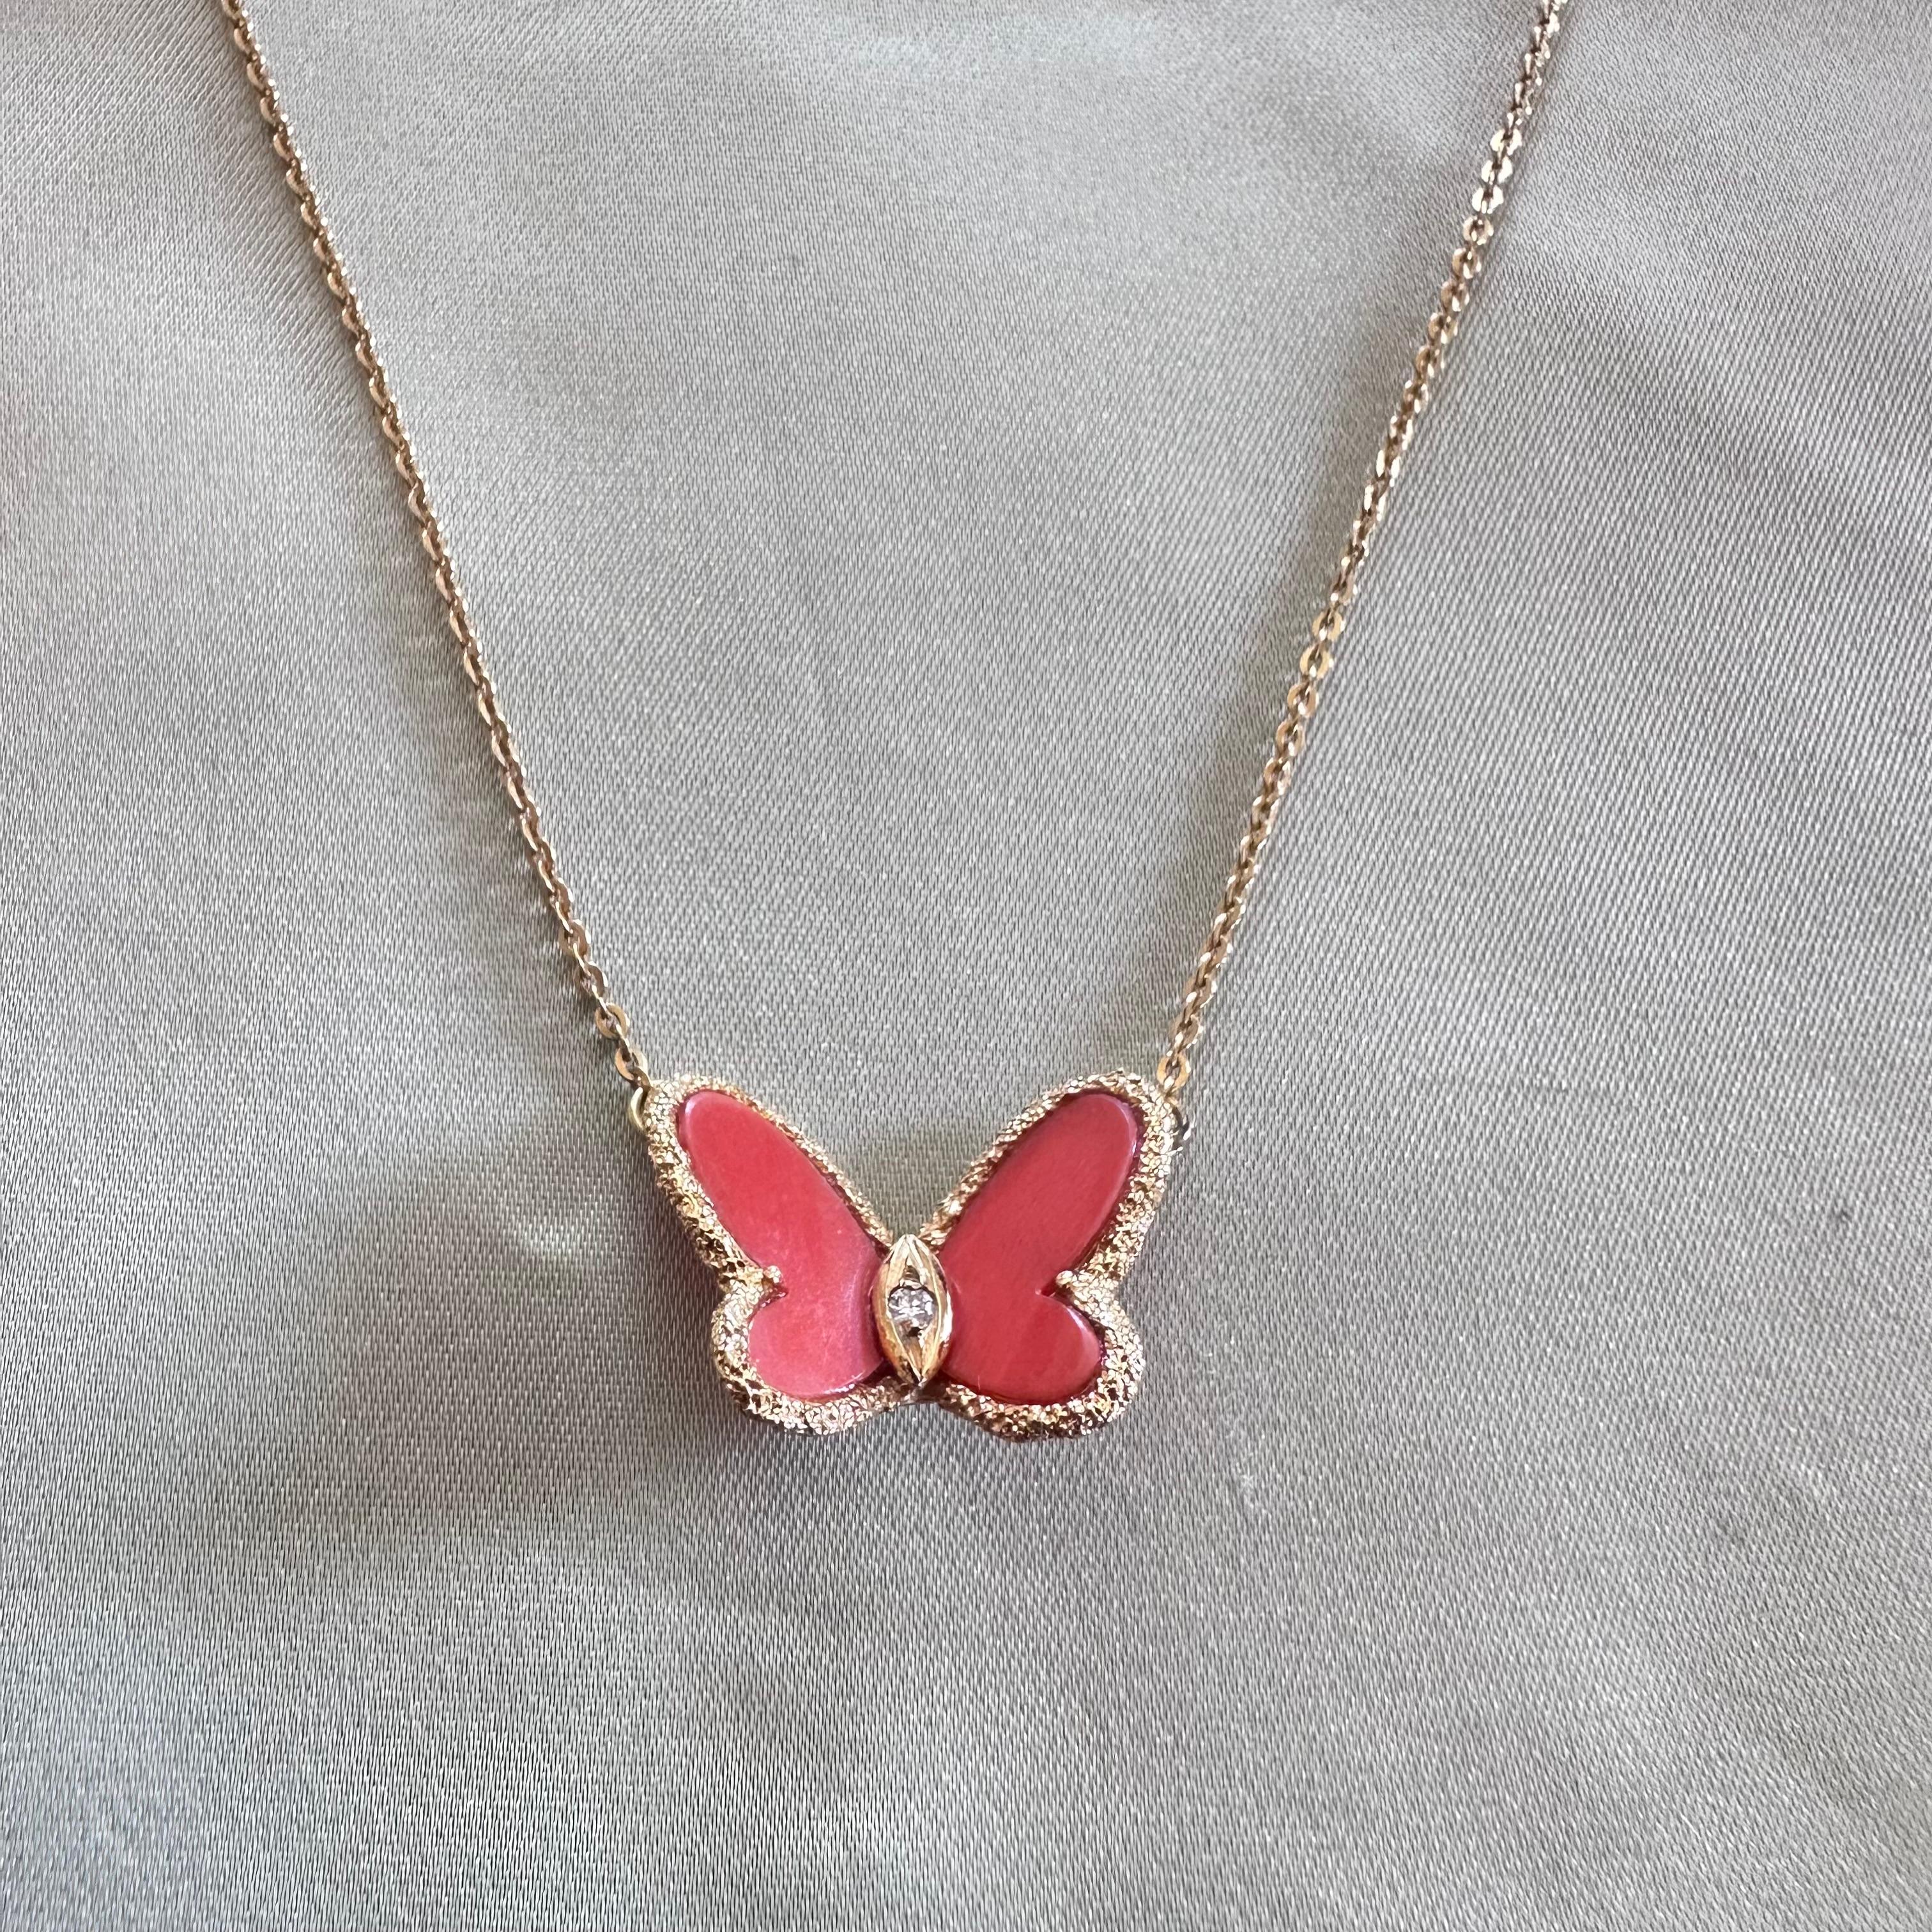 Van Cleef & Arpels Coral and Diamond Butterfly Pendant Necklace.   Crafted in 18-karat yellow gold, it boasts a captivating butterfly Motif in Coral. Combining Van Cleef & Arpels' timeless elegance with mid-20th-century allure, Featuring 2 Coral